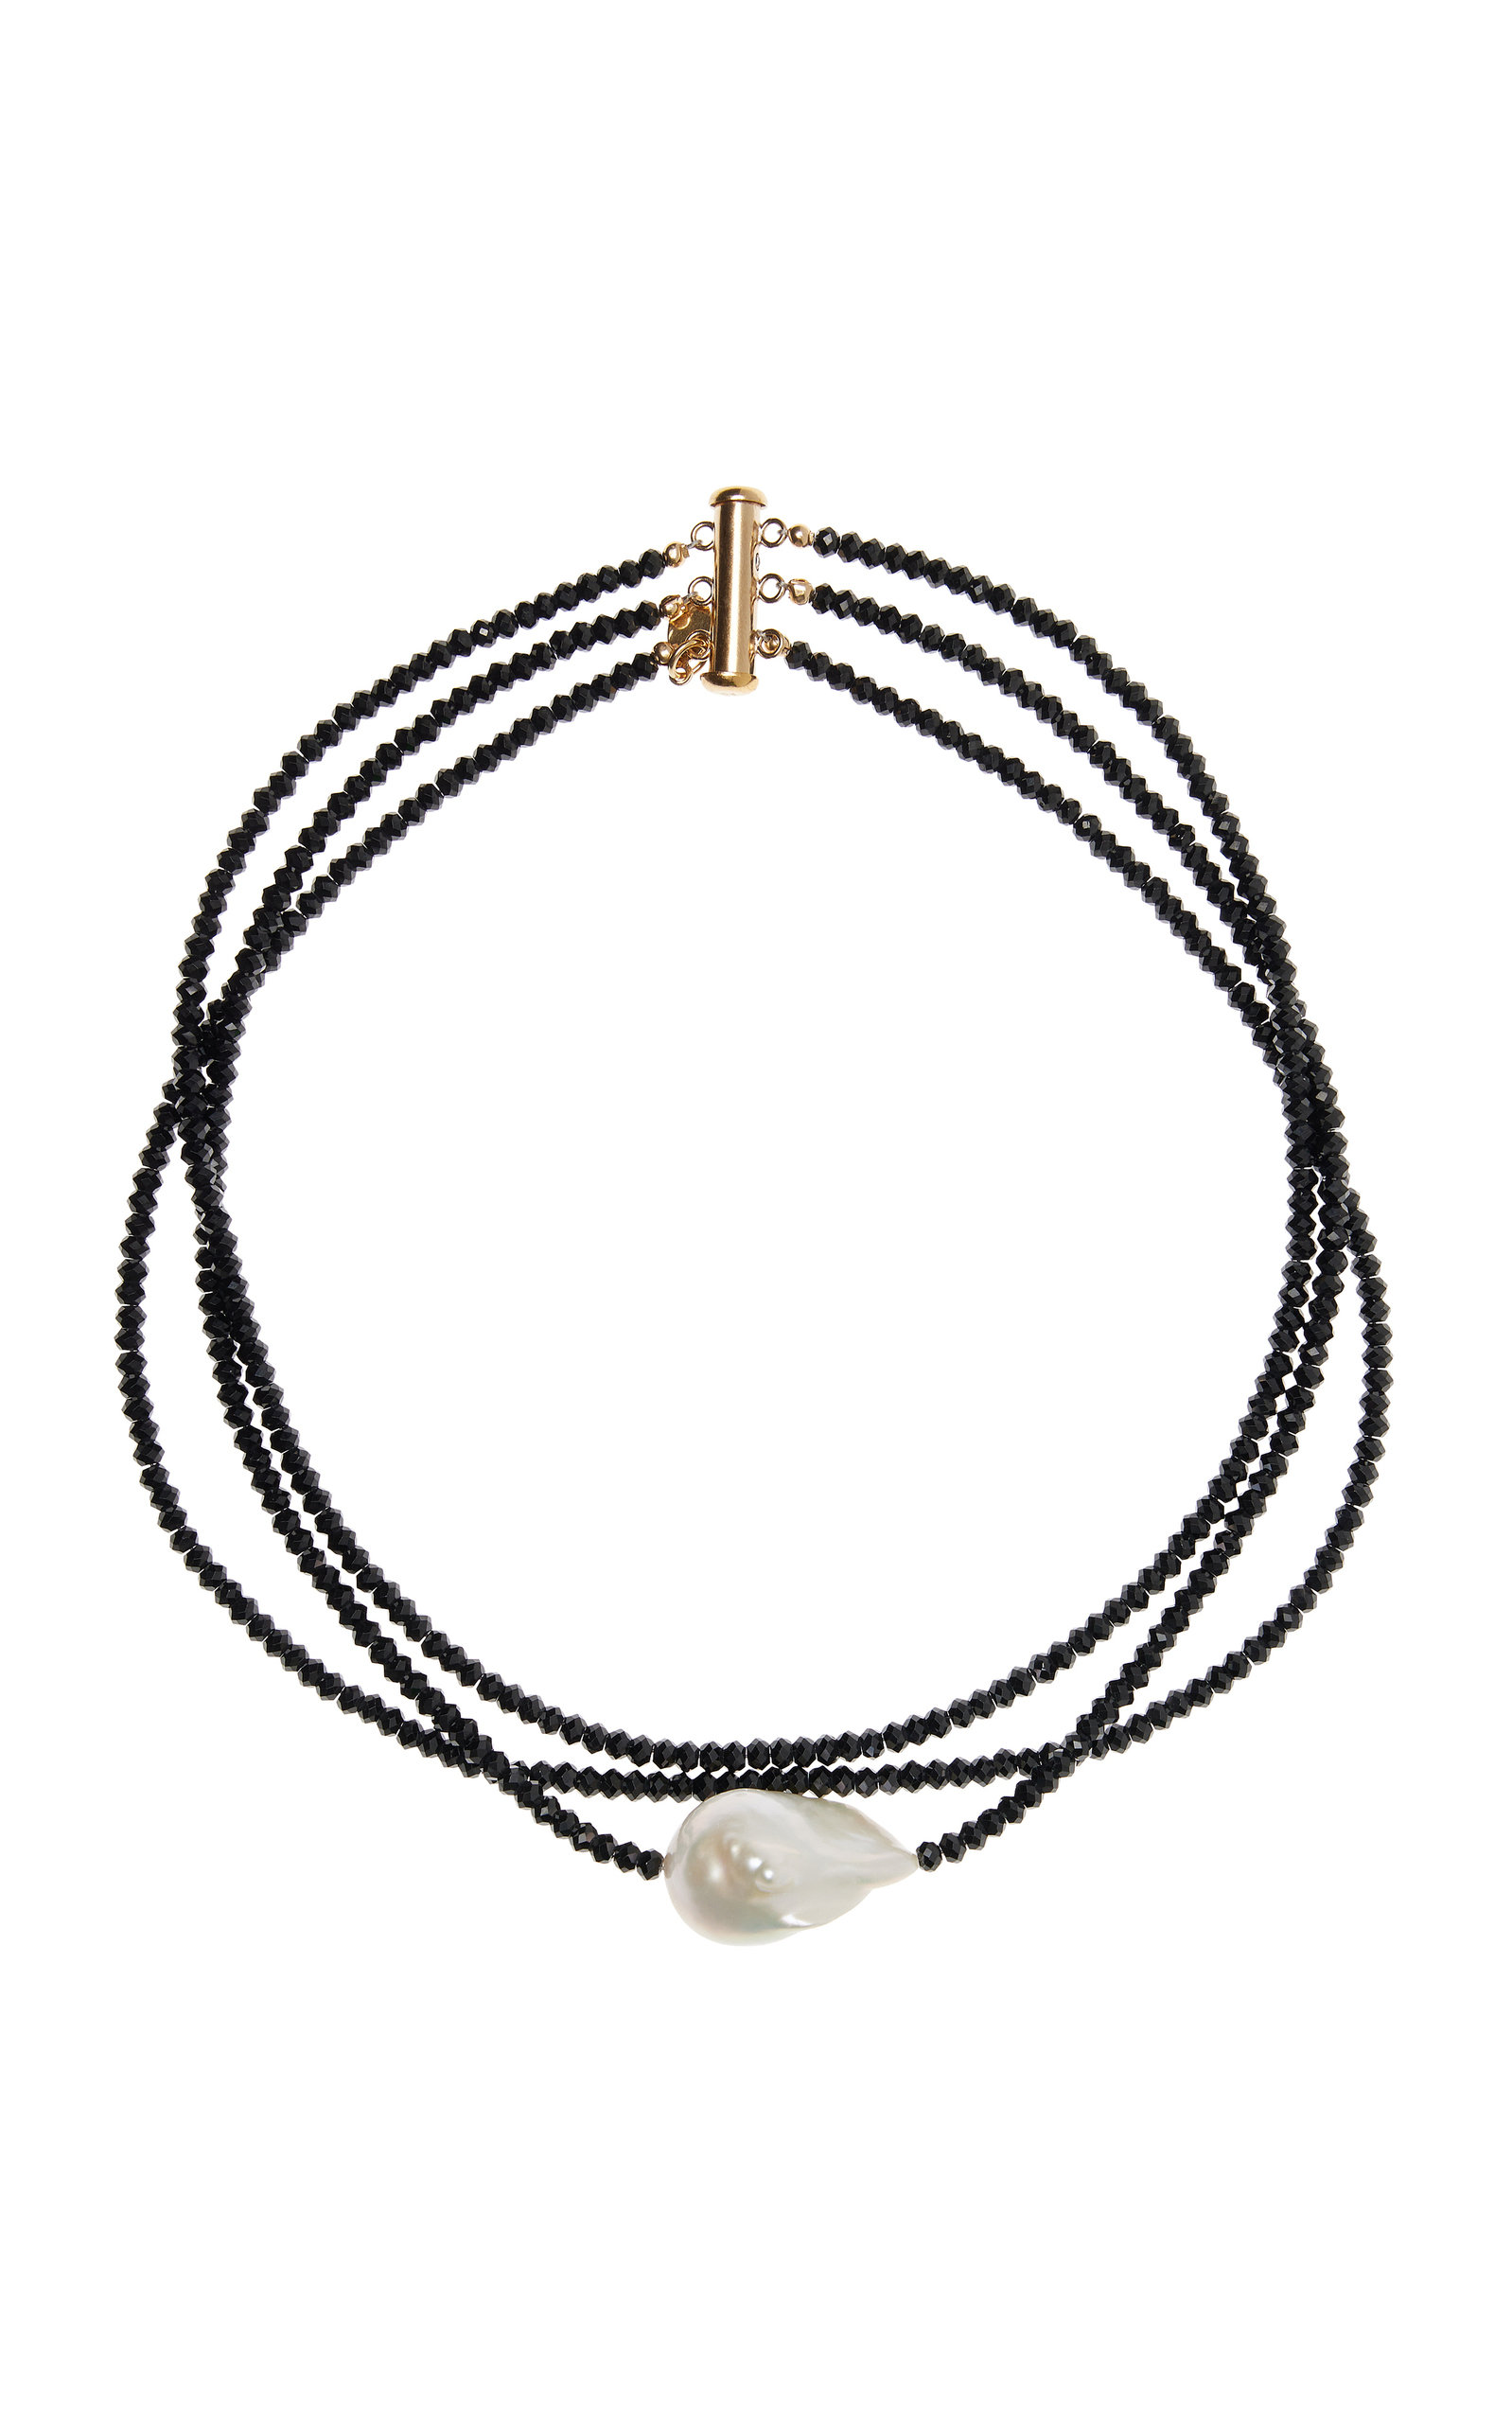 Joie DiGiovanni Women's Pearl; Spinel Gold-Filled Choker